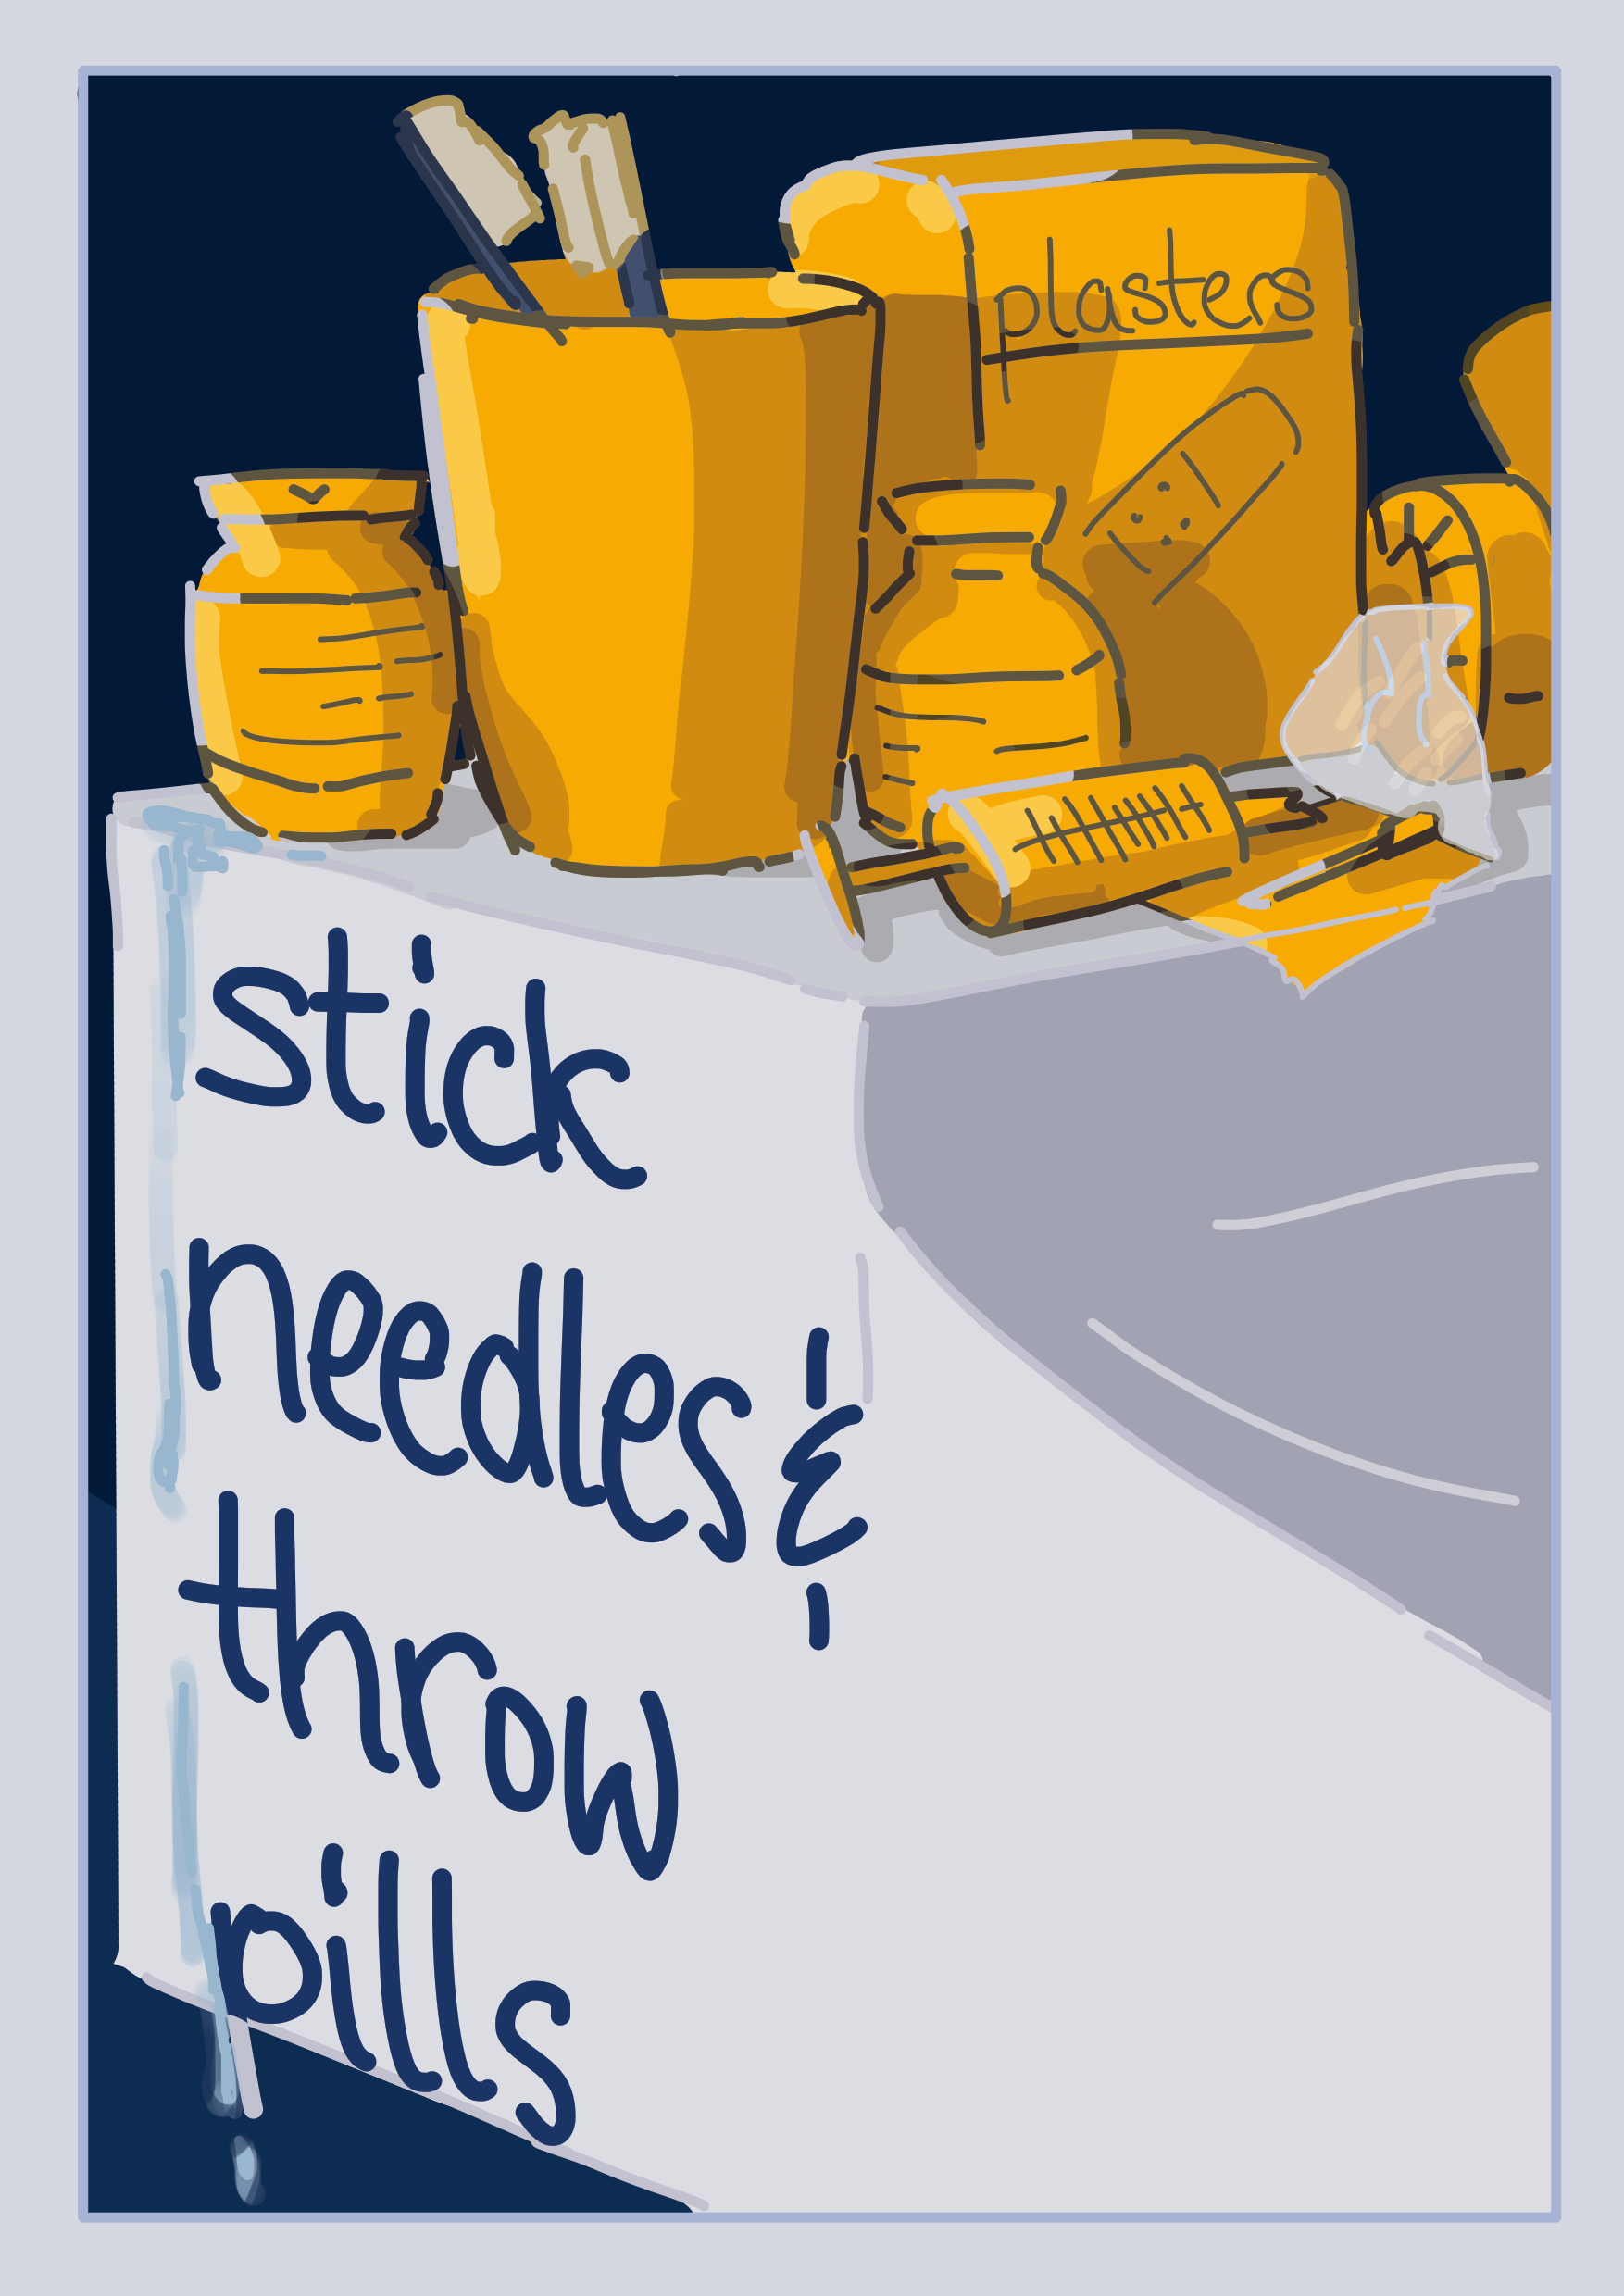 Page three: A white sink in front of dark blue ground. Many yellow common bathroom utensils lay on top of the sink, notable two toothbrushes in a cup, a package of plasters, two undescribed vials and a syringe. Text on the side of the sink reads: stick needles & throw pills.